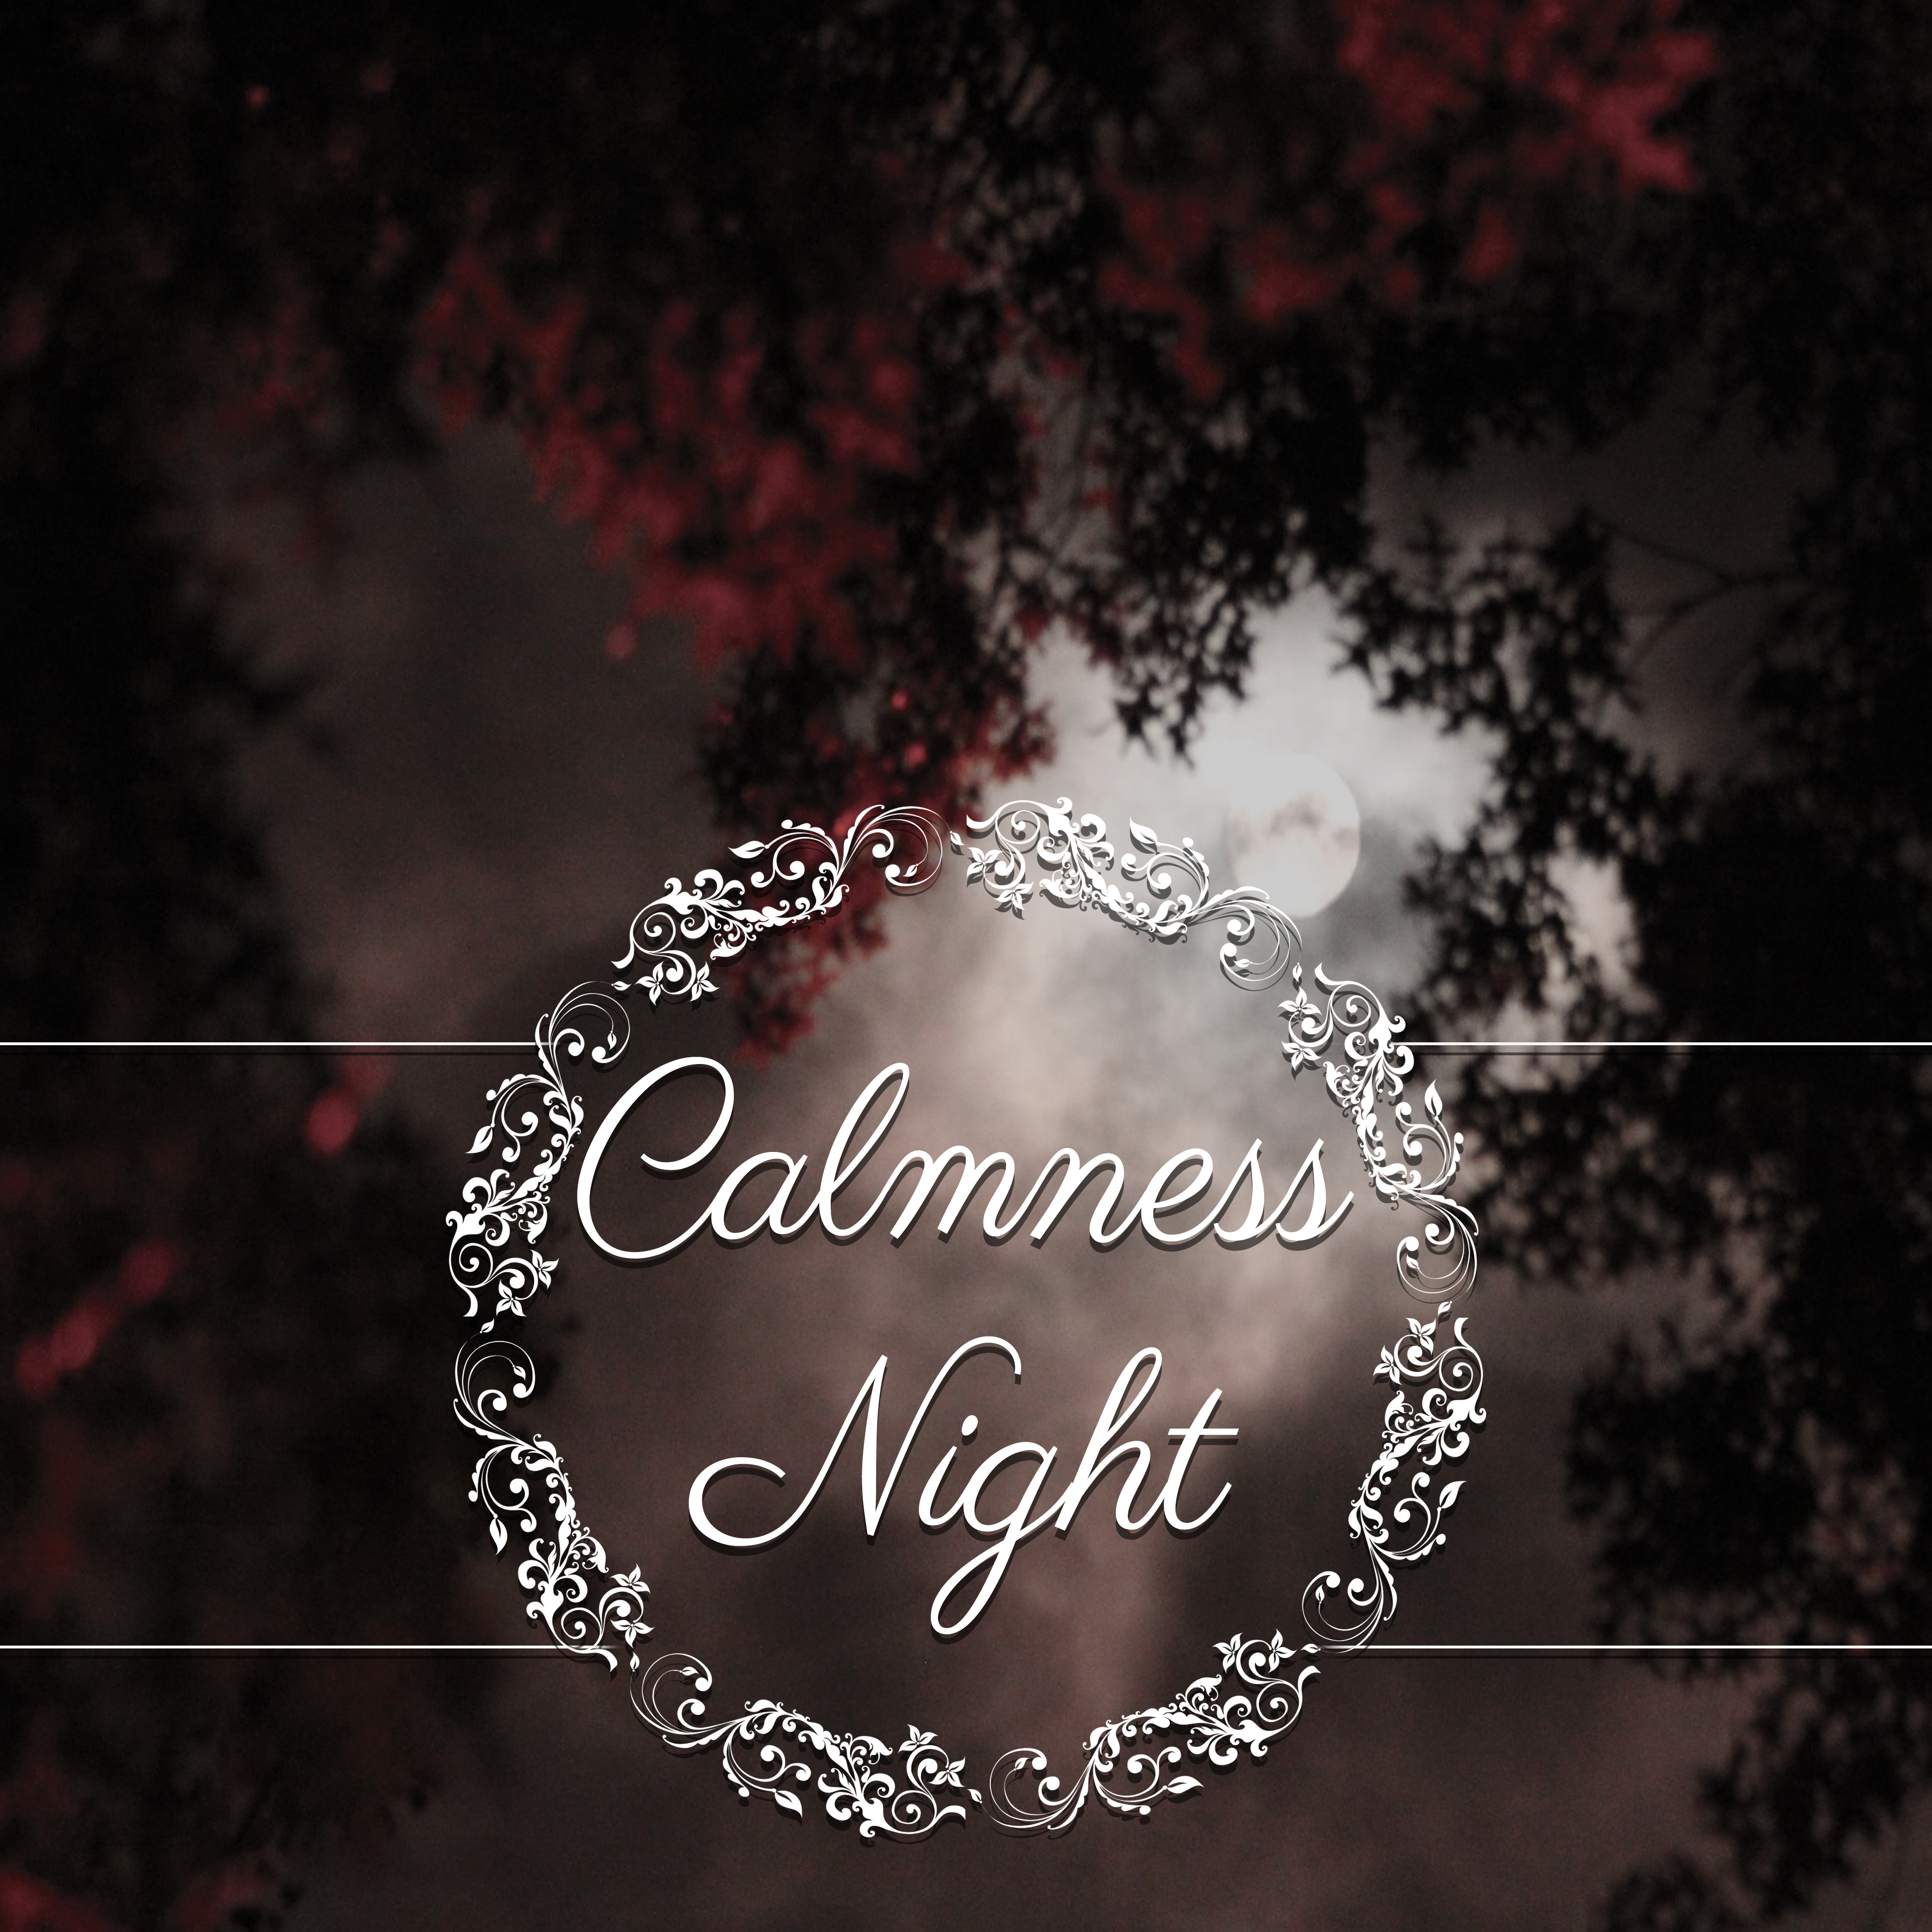 Calmness Night – Soothing New Age Sounds, Music to Fall Asleep, Deep Relaxation